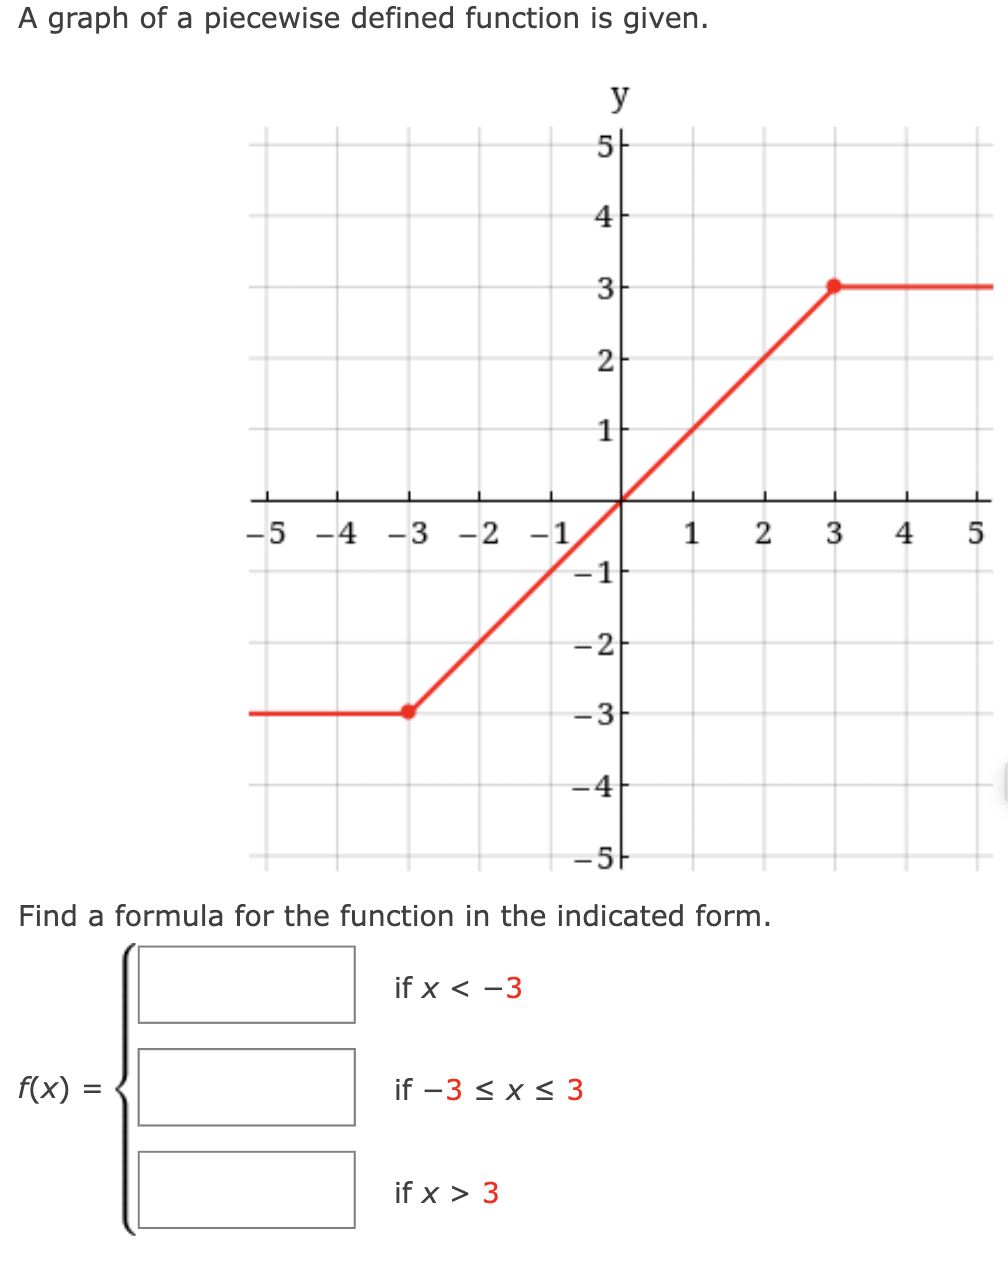 A graph of a piecewise defined function is given.
y
5-
4
3
2
-5 -4 -3 -2 -1
4
-1
-2
-3-
-4
-5-
Find a formula for the function in the indicated form.
if x < -3
f(x)
if -3 < x< 3
if x > 3
3.
2.
